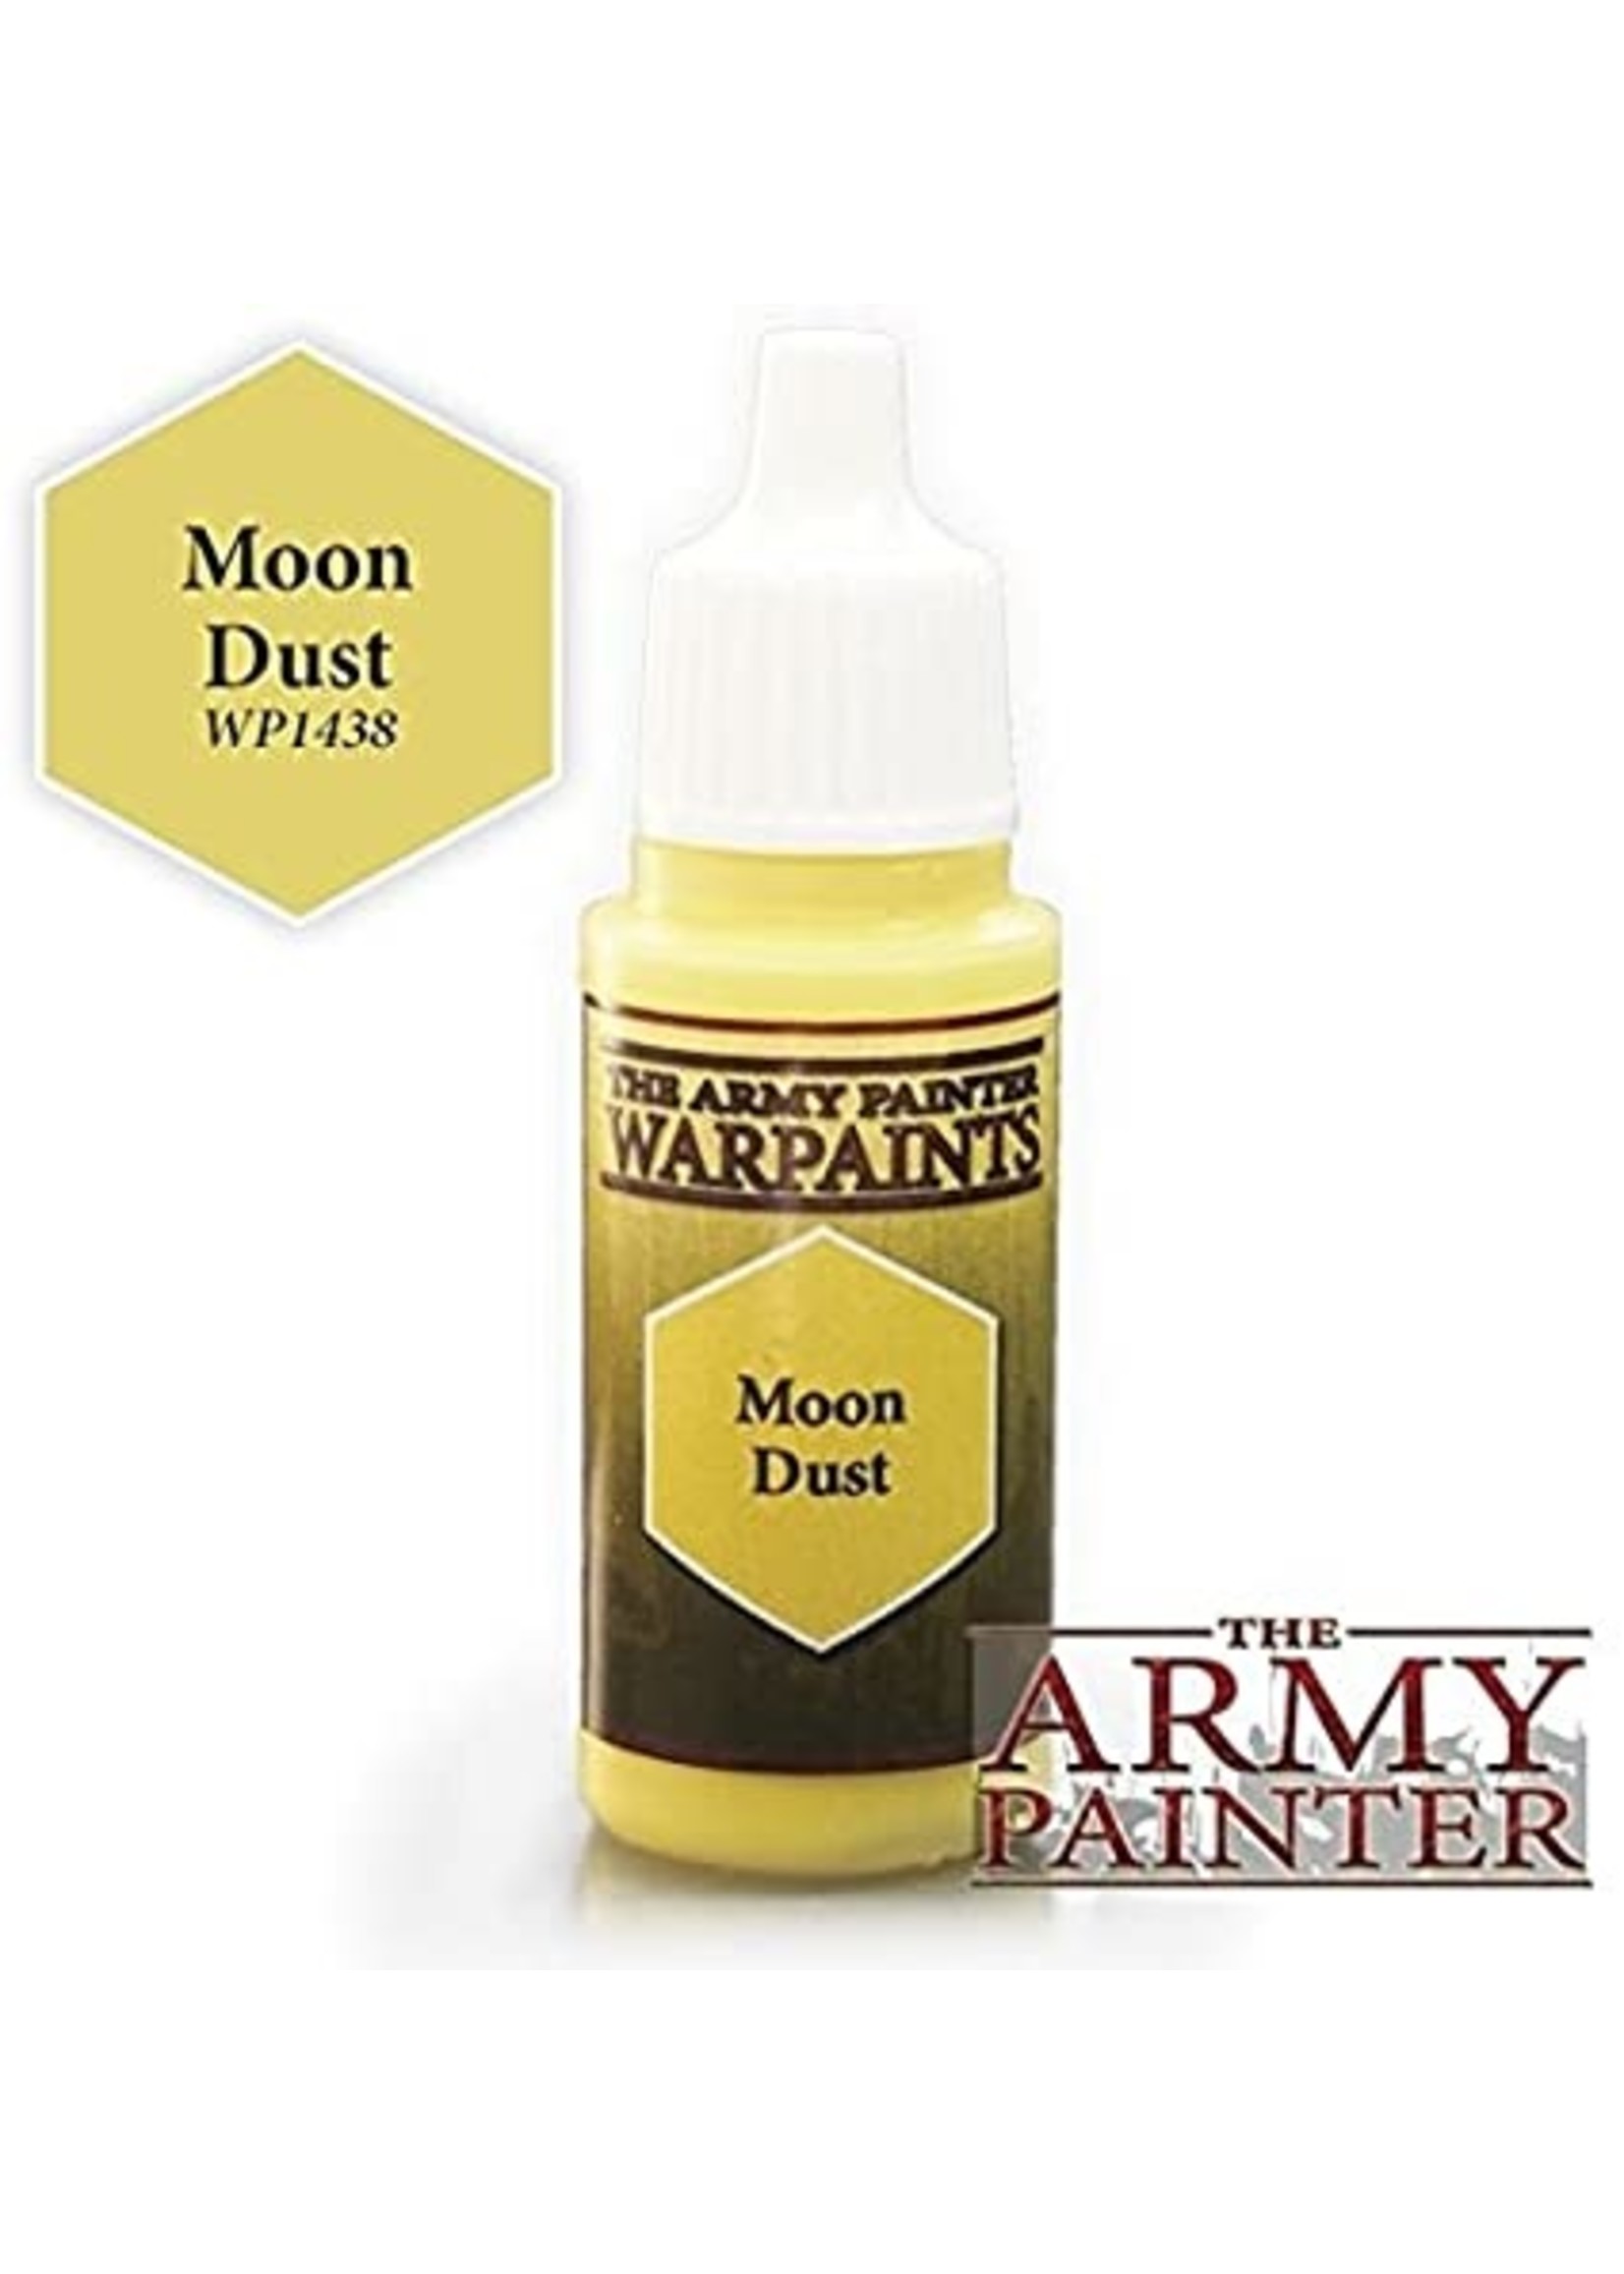 The Army Painter Acrylics Warpaints Moon Dust